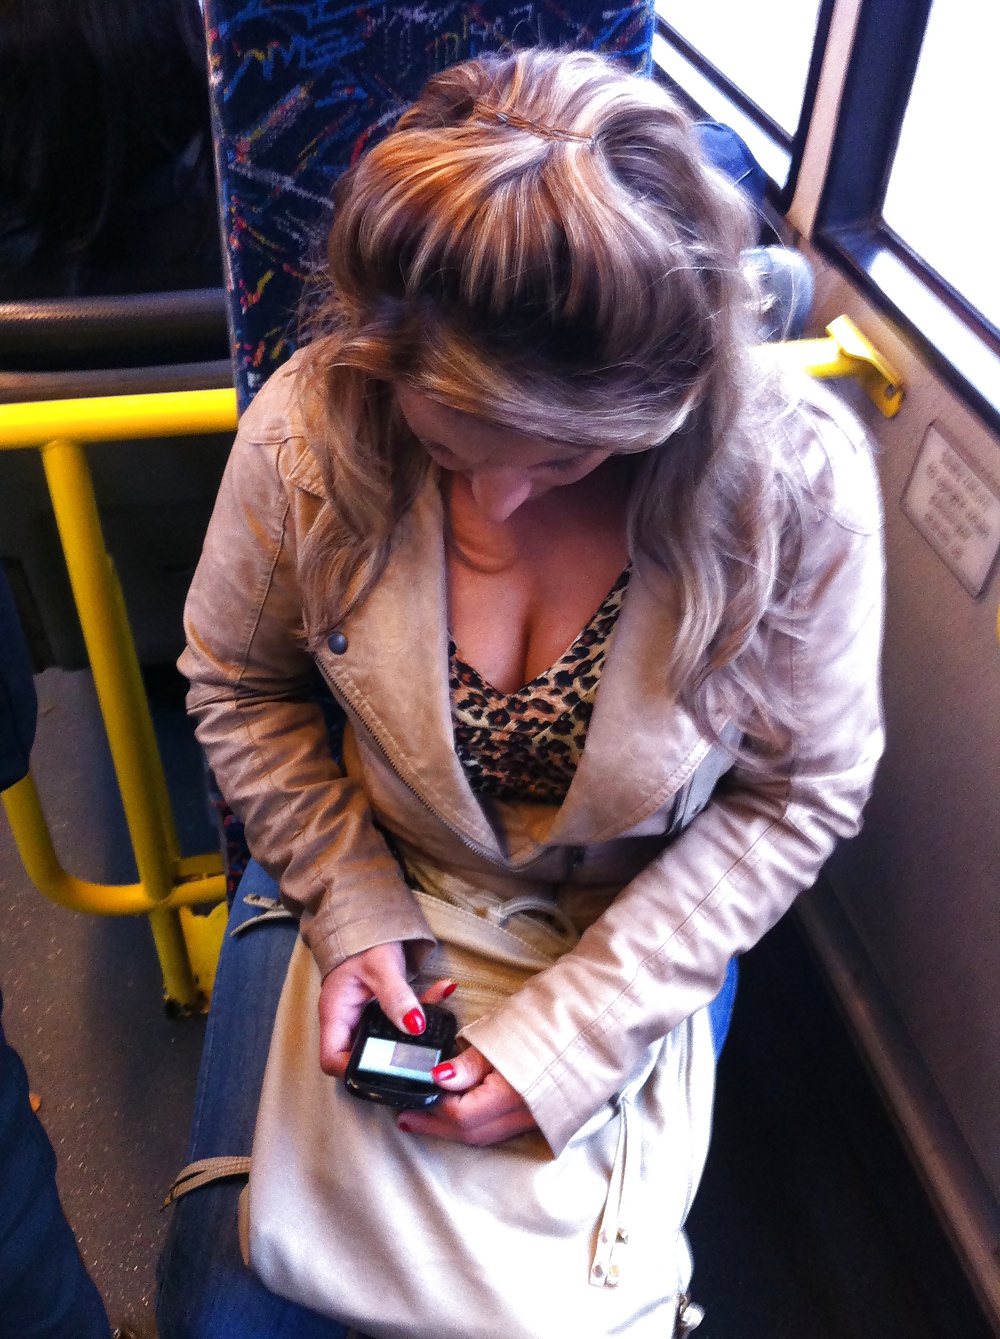 Perving on the bus